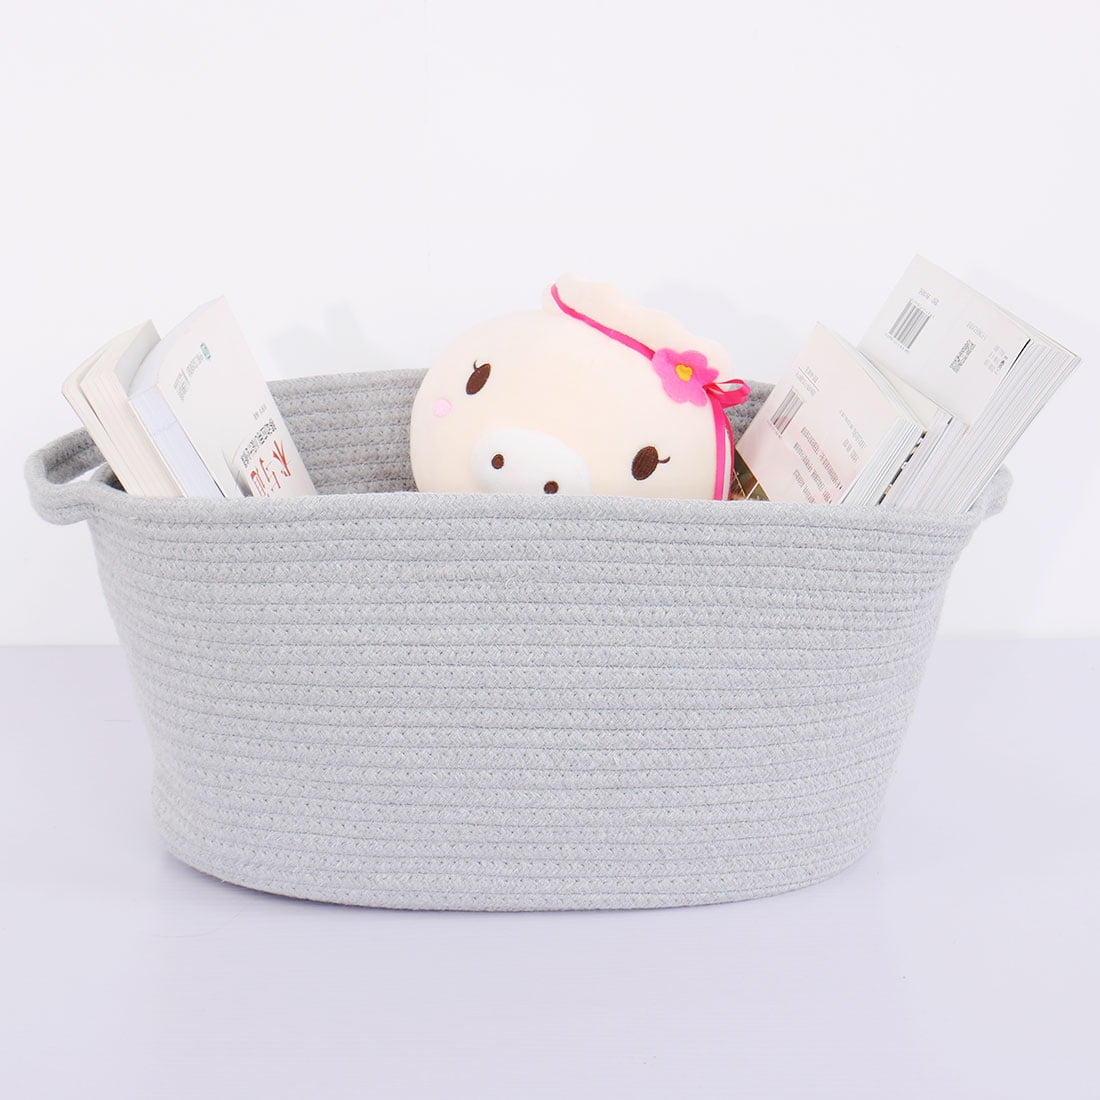 CleverMade SnapBasket LaundryCaddy/CarryAll XL Pop-Up Hamper, Collapsible  Laundry Basket, and Extra-…See more CleverMade SnapBasket